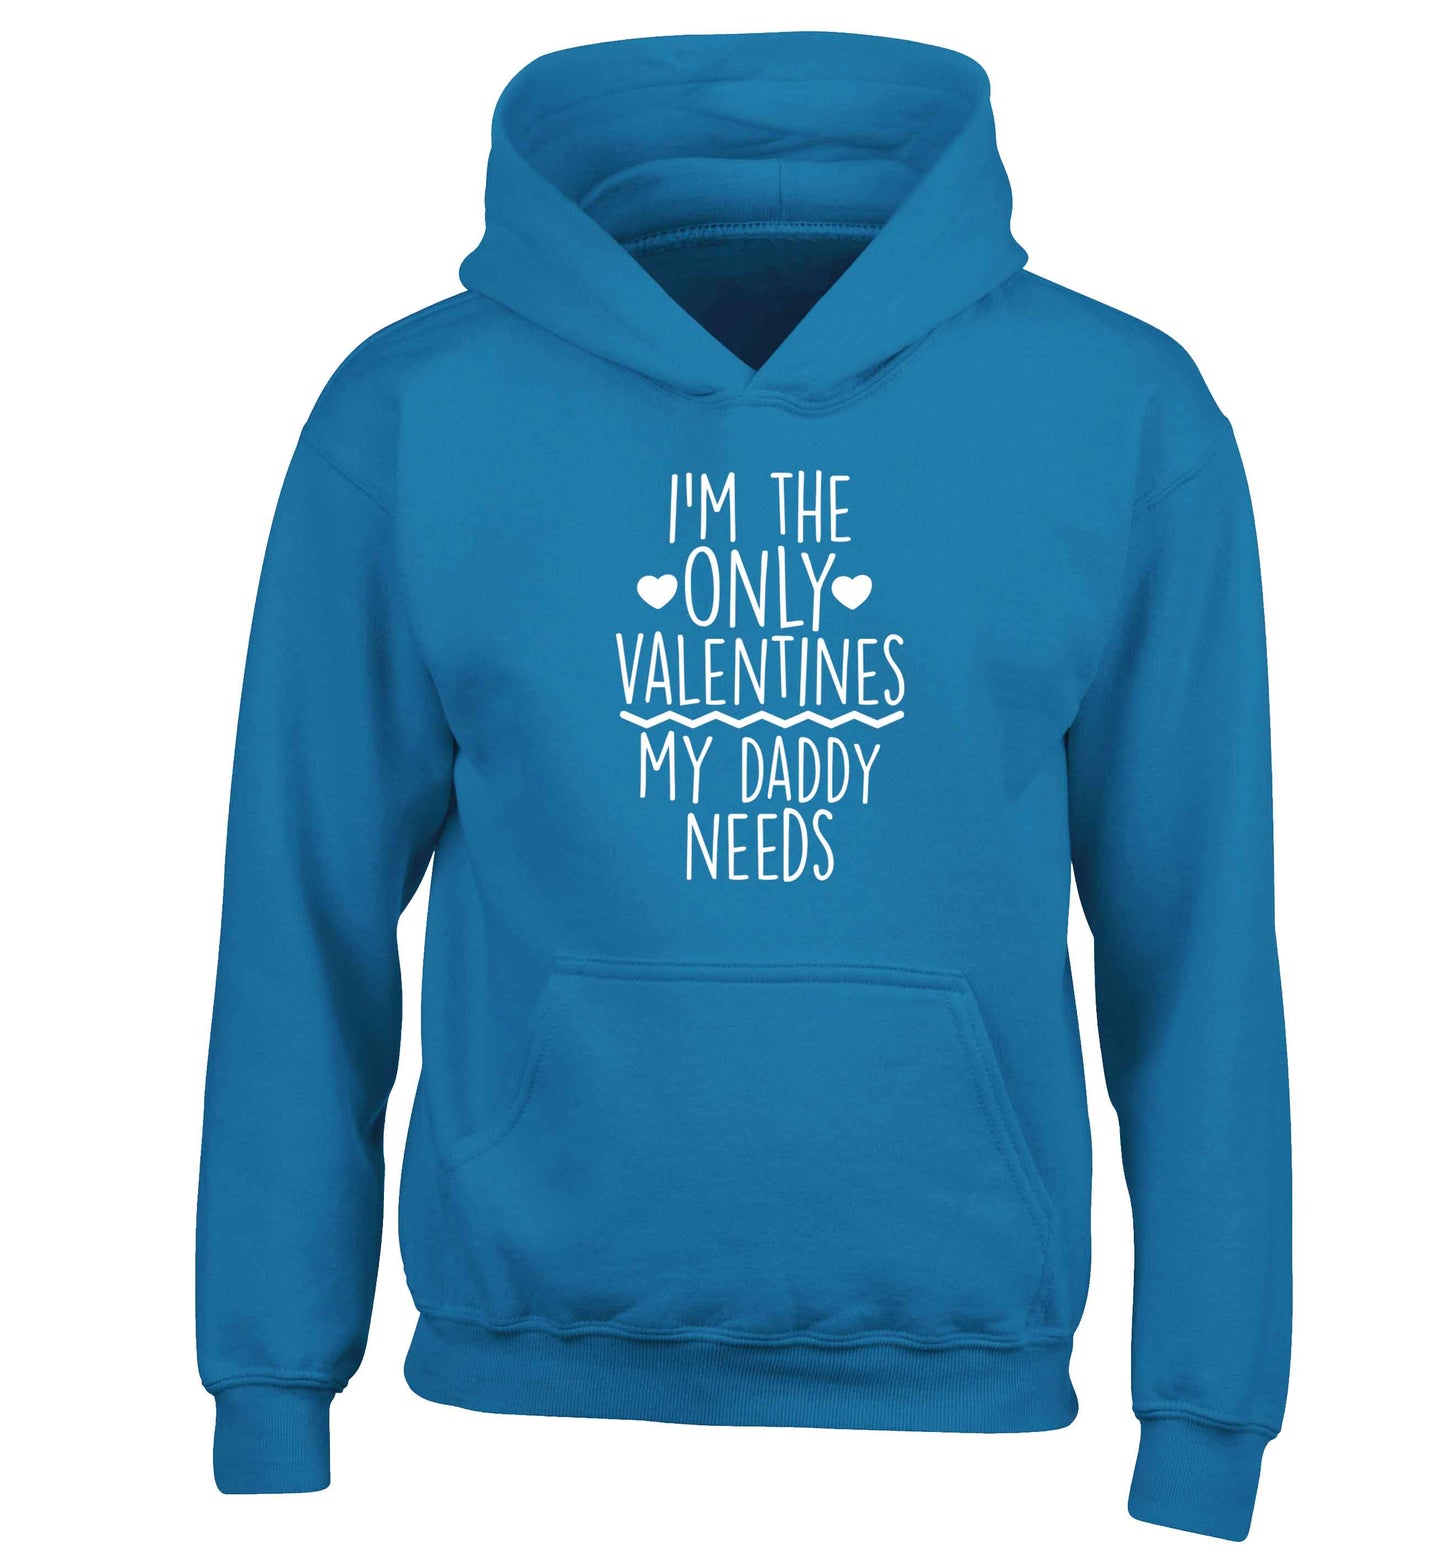 I'm the only valentines my daddy needs children's blue hoodie 12-13 Years